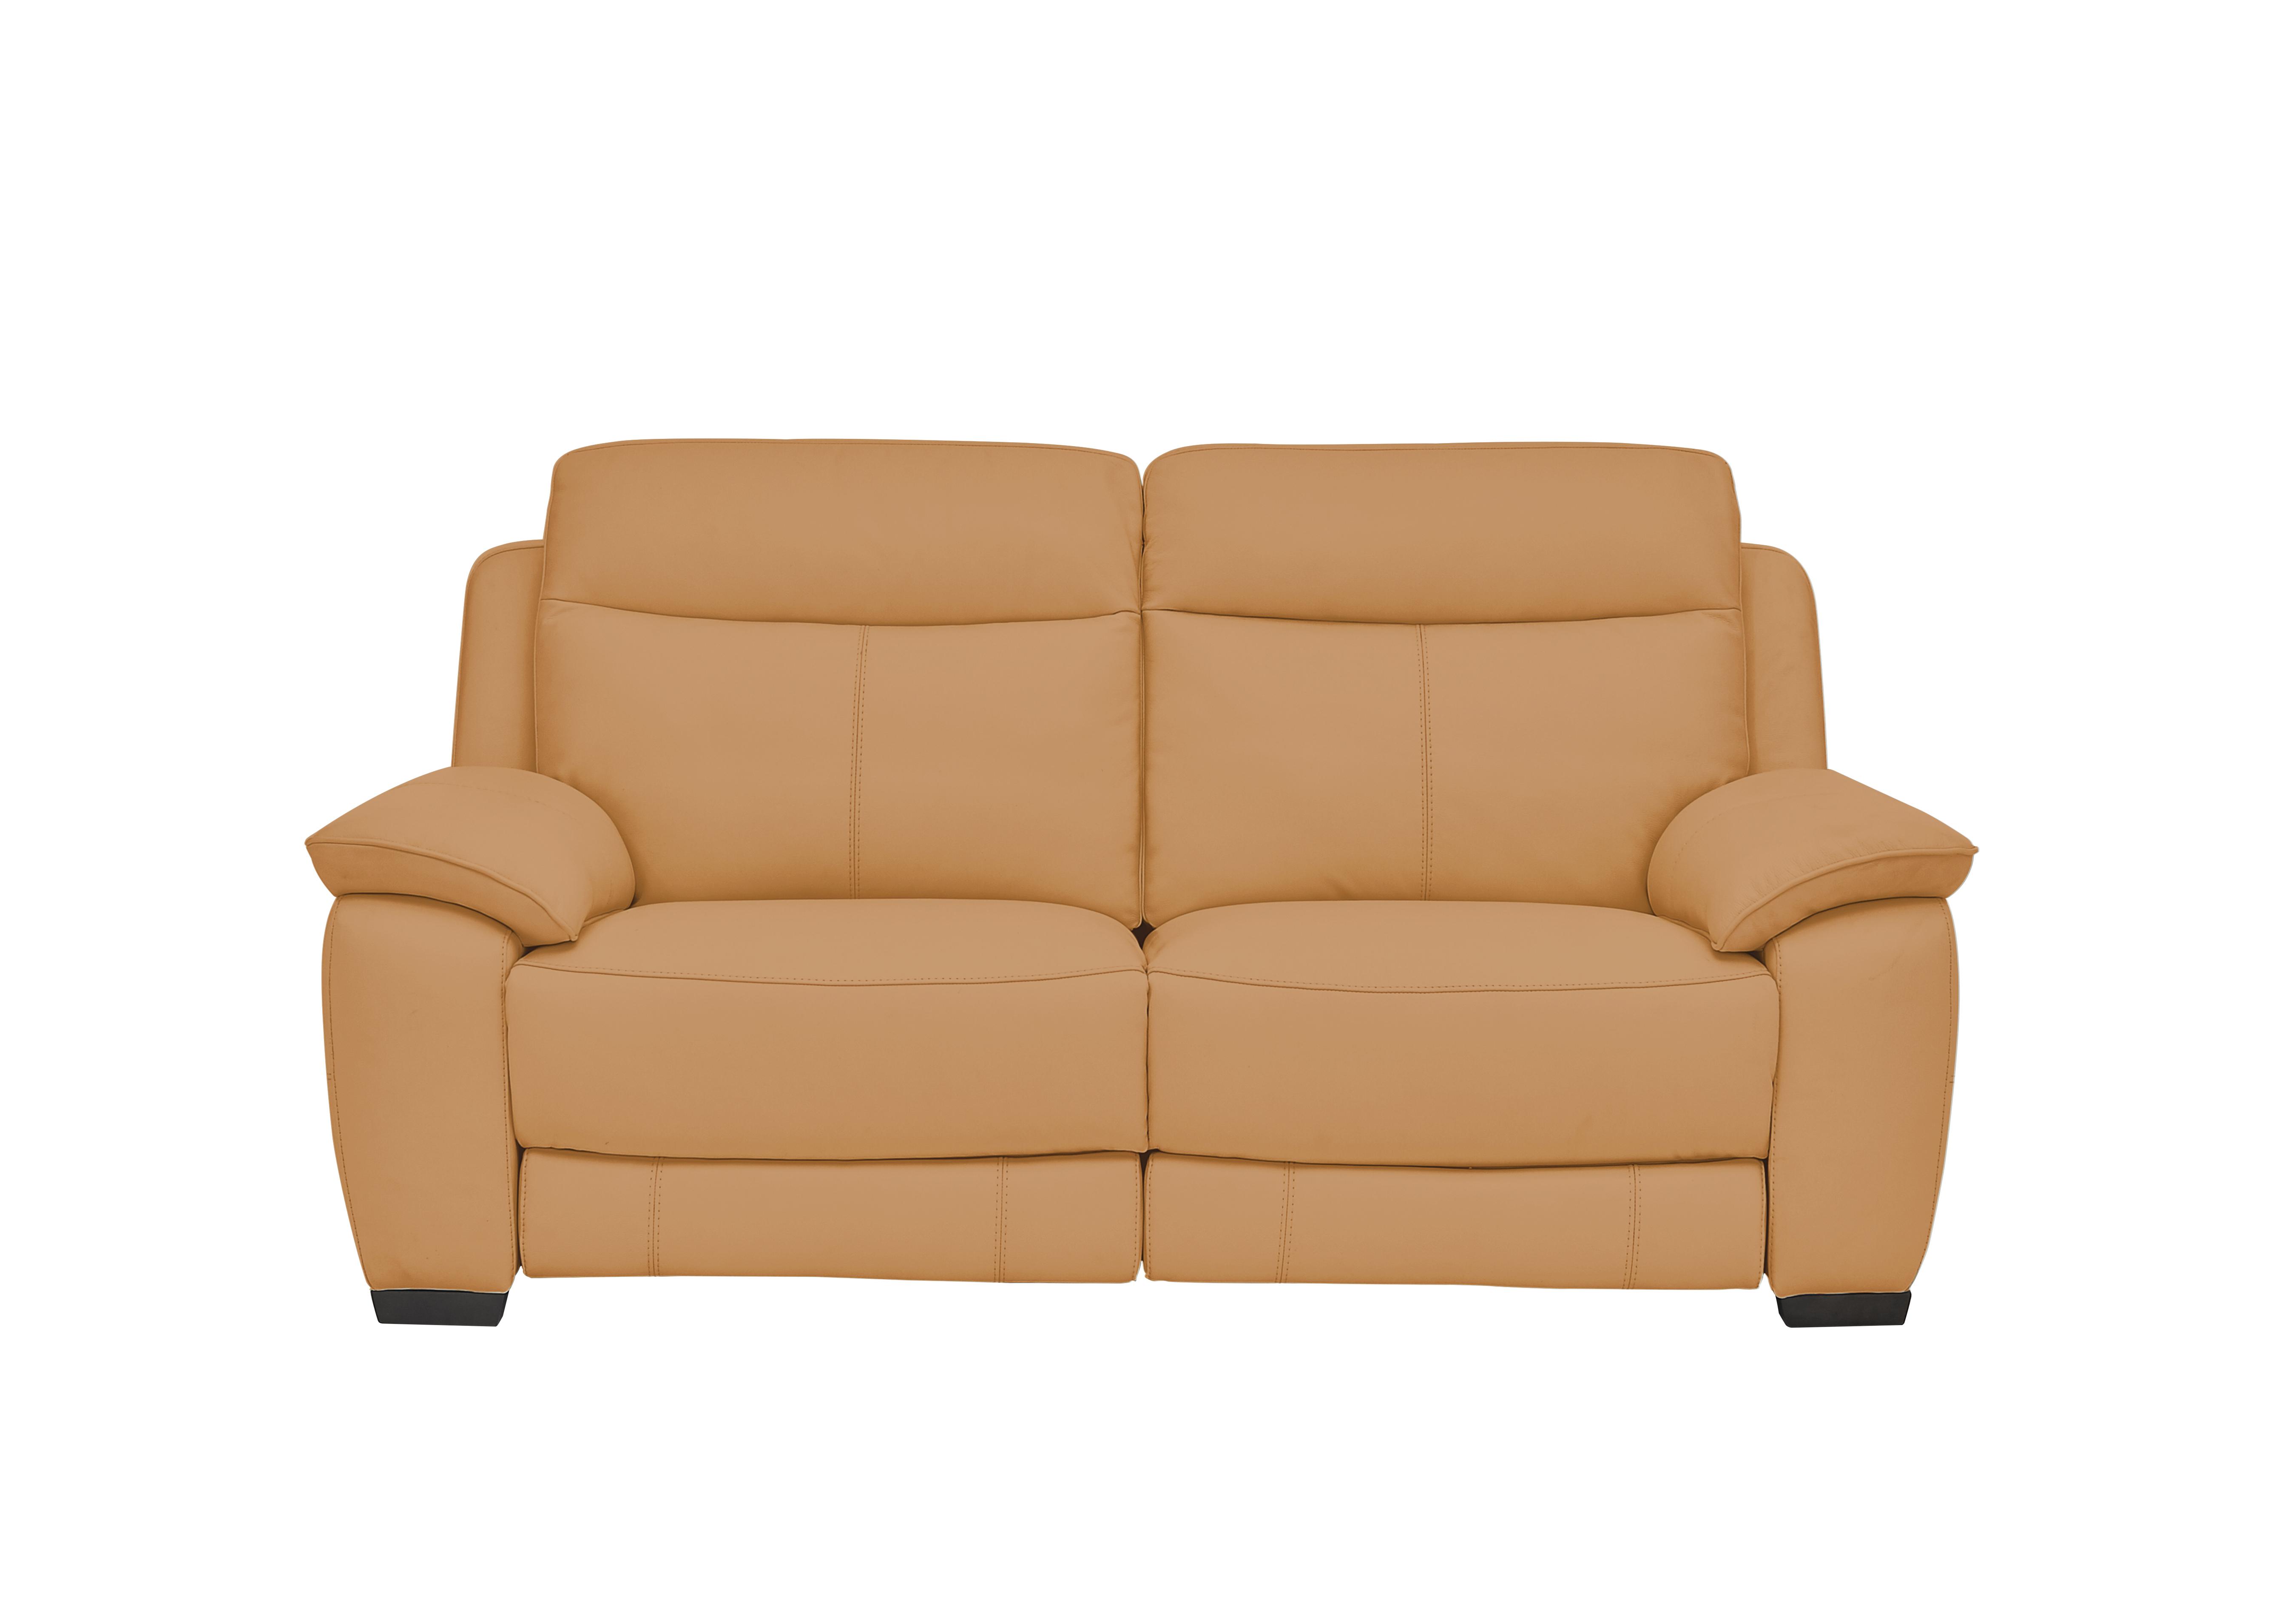 Starlight Express 2 Seater Leather Recliner Sofa with Power Headrests in Bv-335e Honey Yellow on Furniture Village